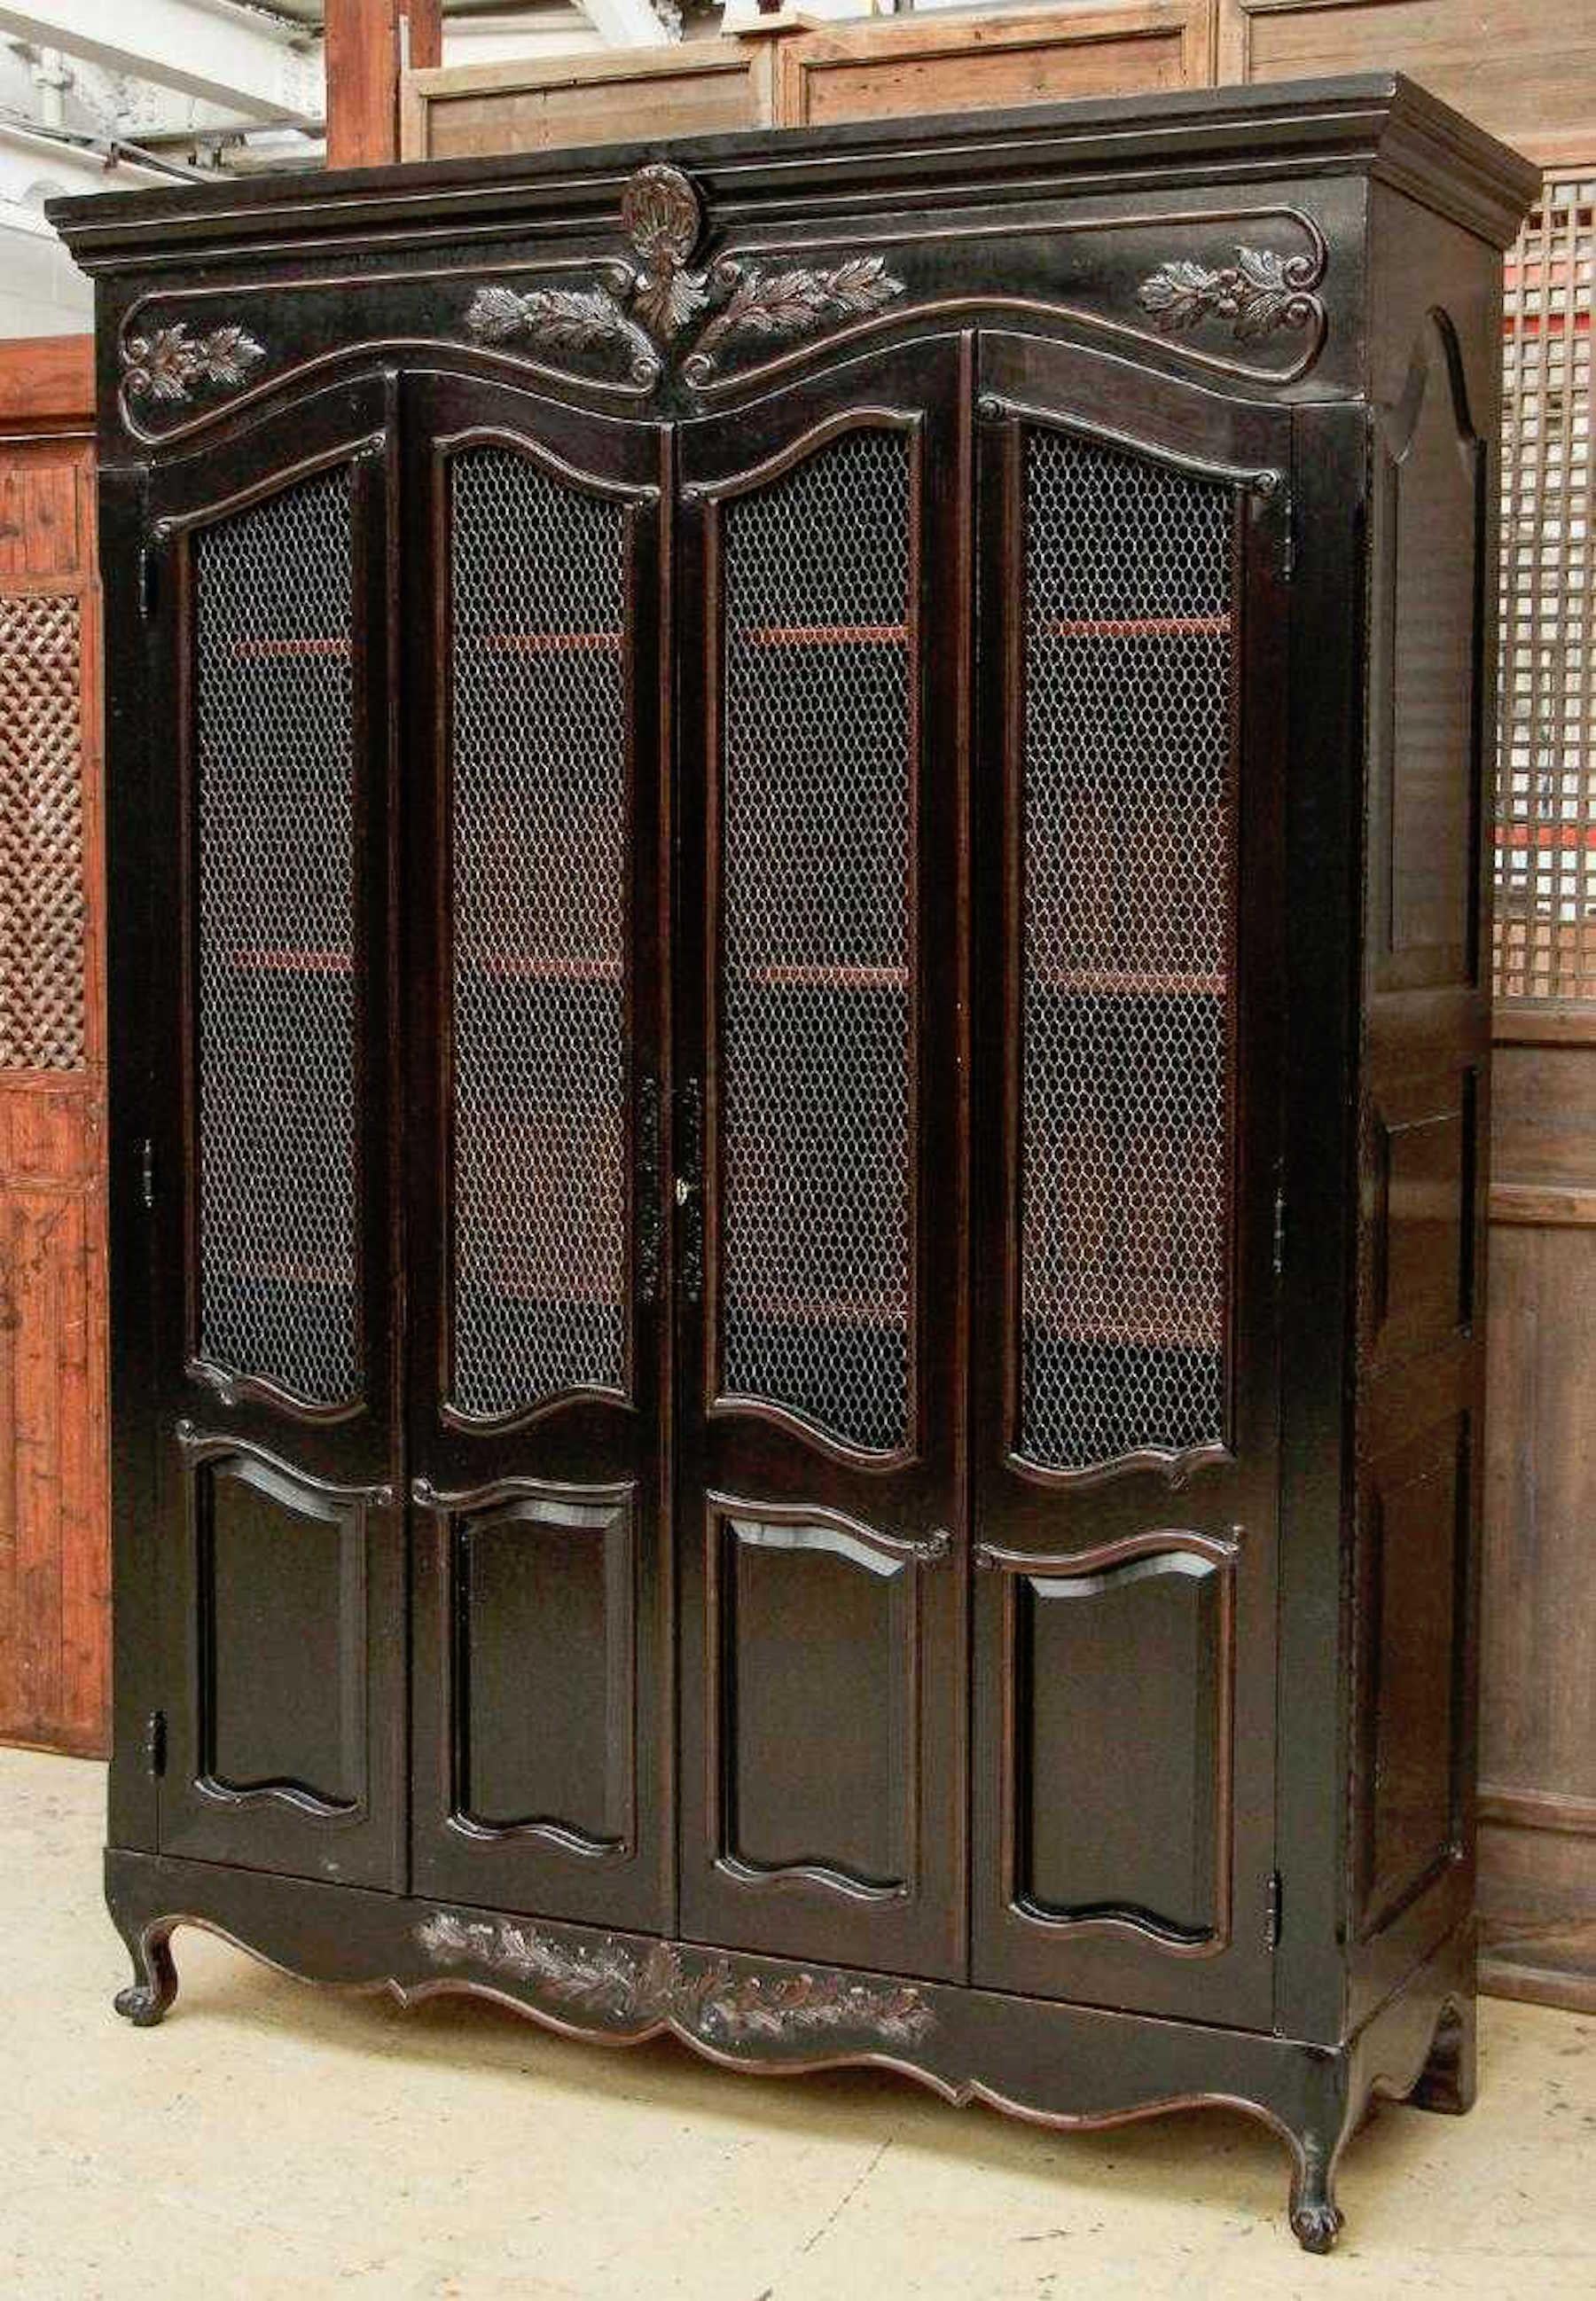 Harcourt display cabinet by Scott Thomas Furniture, part of the Loire Valley collection, in the Chateau Noir Finish. An Exquisite bibliotech with two brass mesh doors, revealing a fitted interior with shelves, two cabinets, and three center drawers,